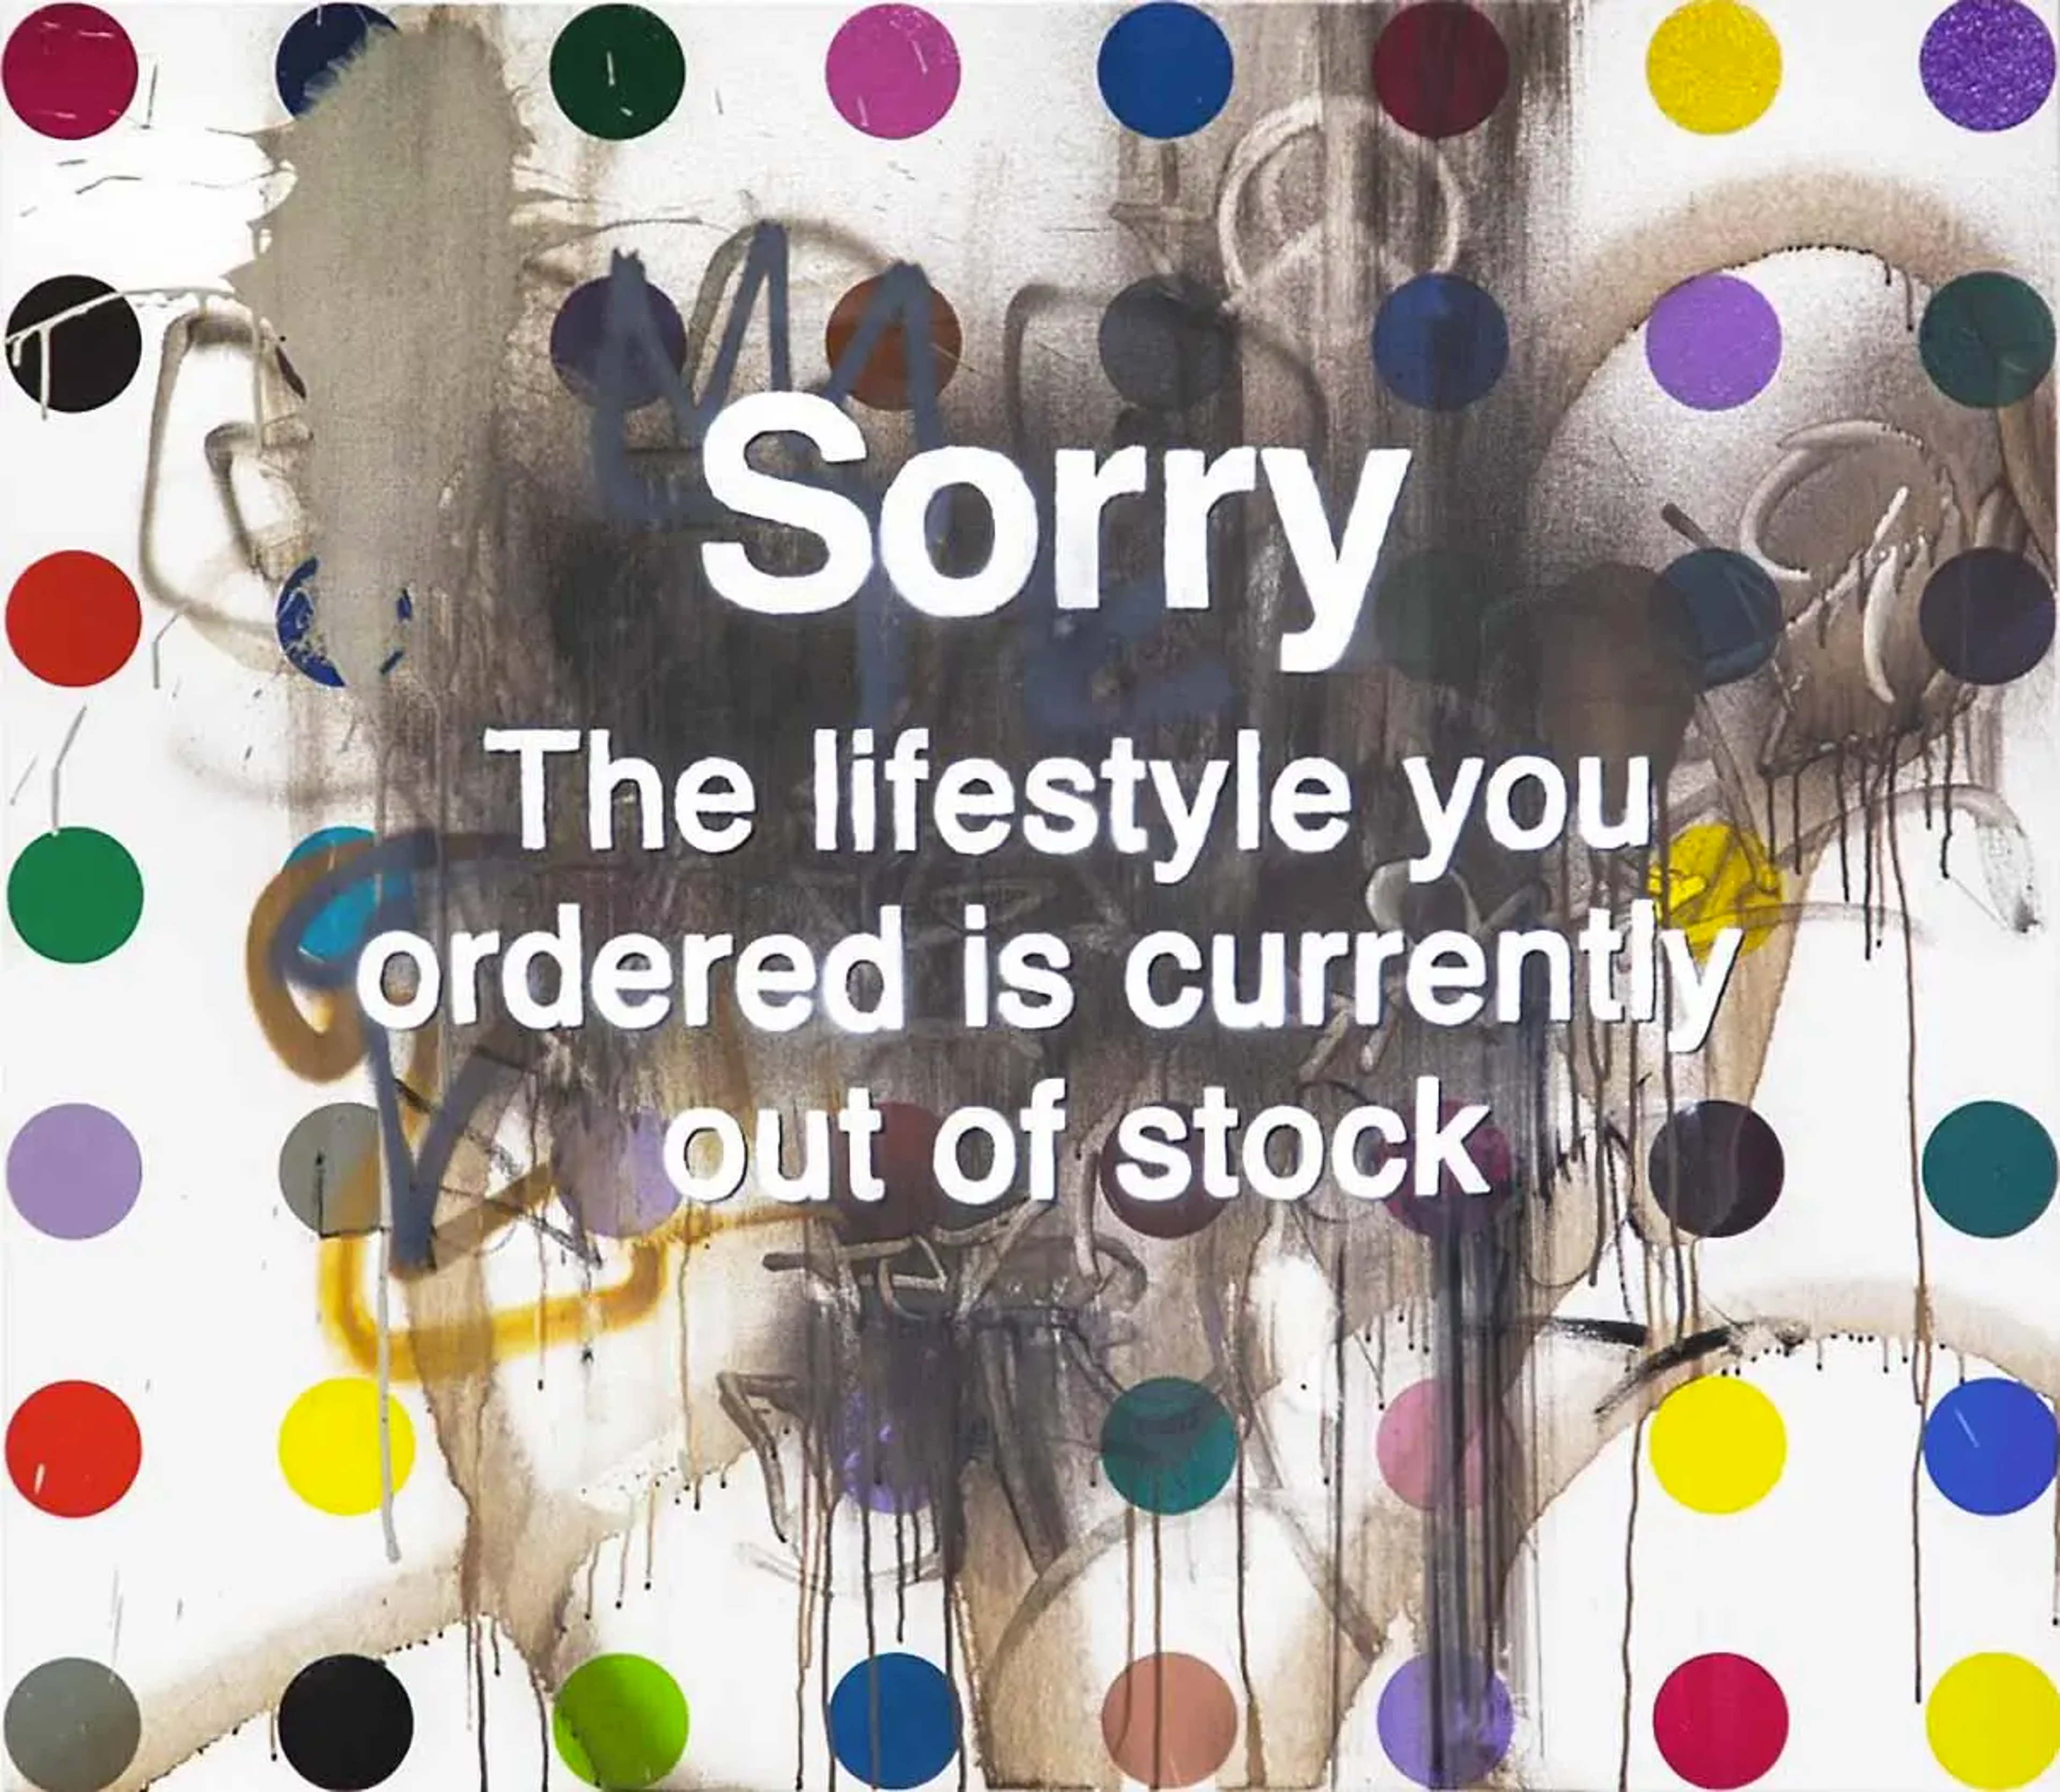 Banksy's Sorry The Lifestyle You Ordered Is Currently Out Of Stock